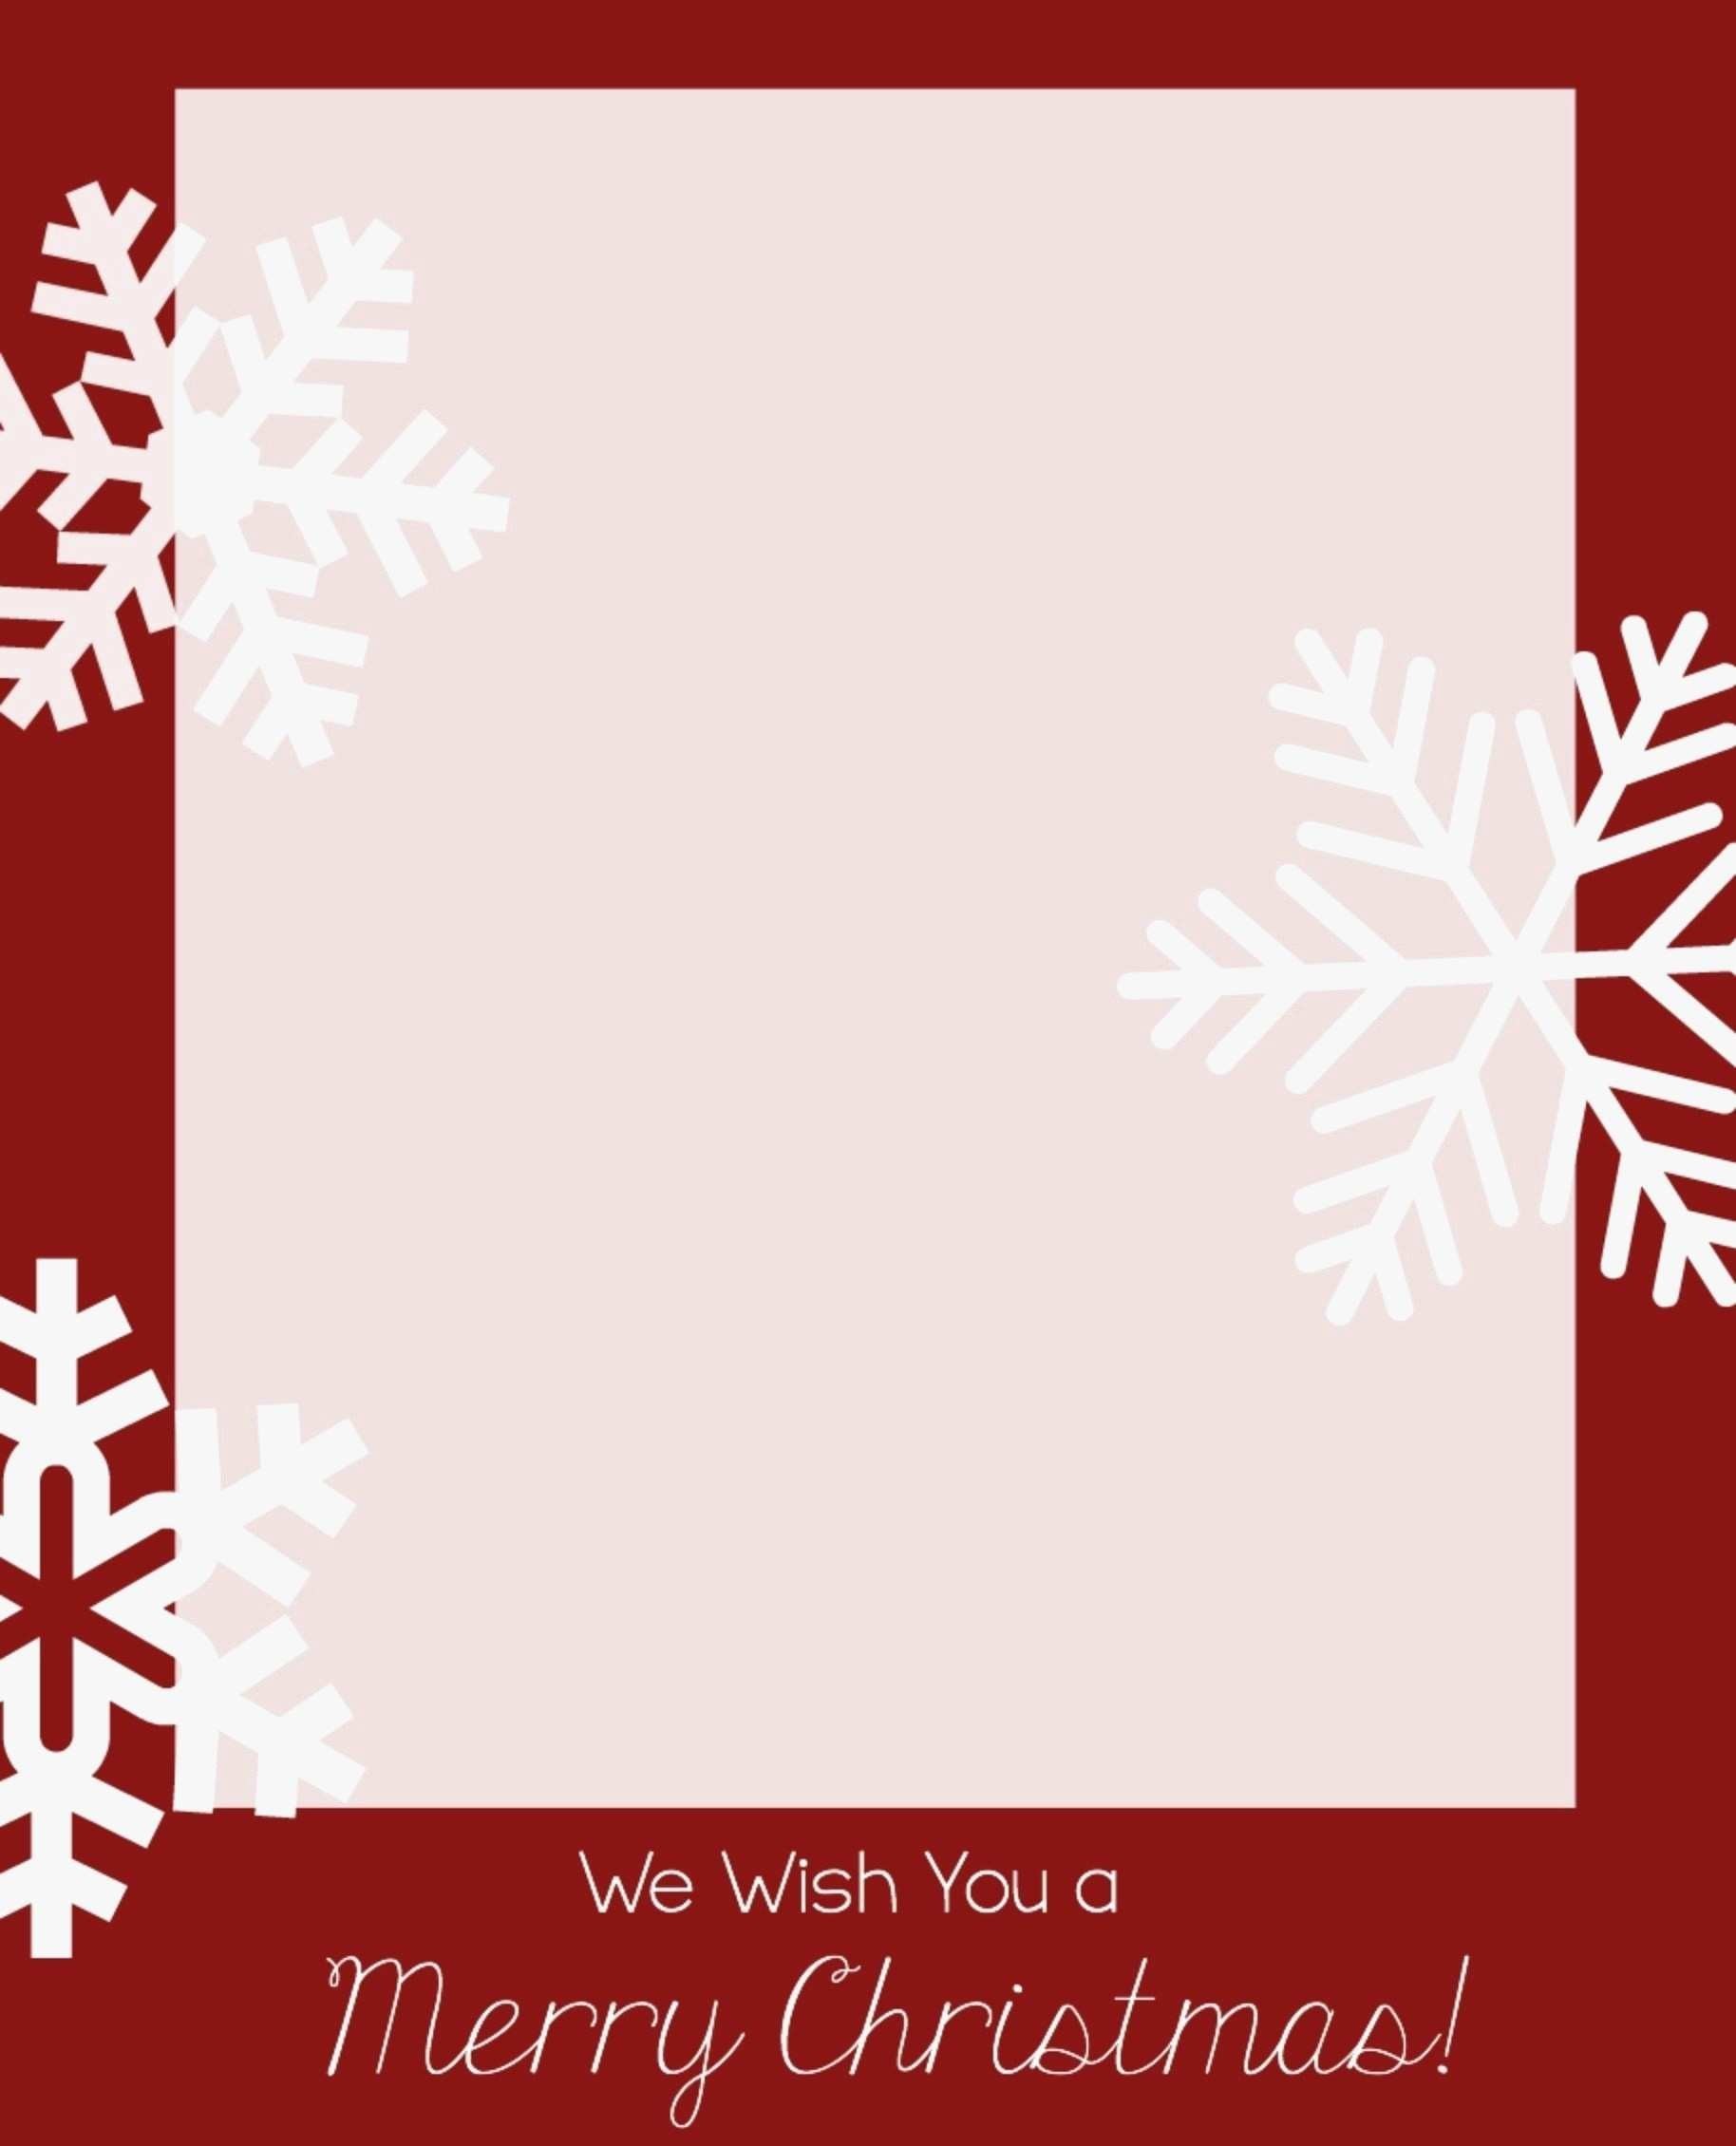 Christmas Card Templates Photoshop Free Download Beautiful